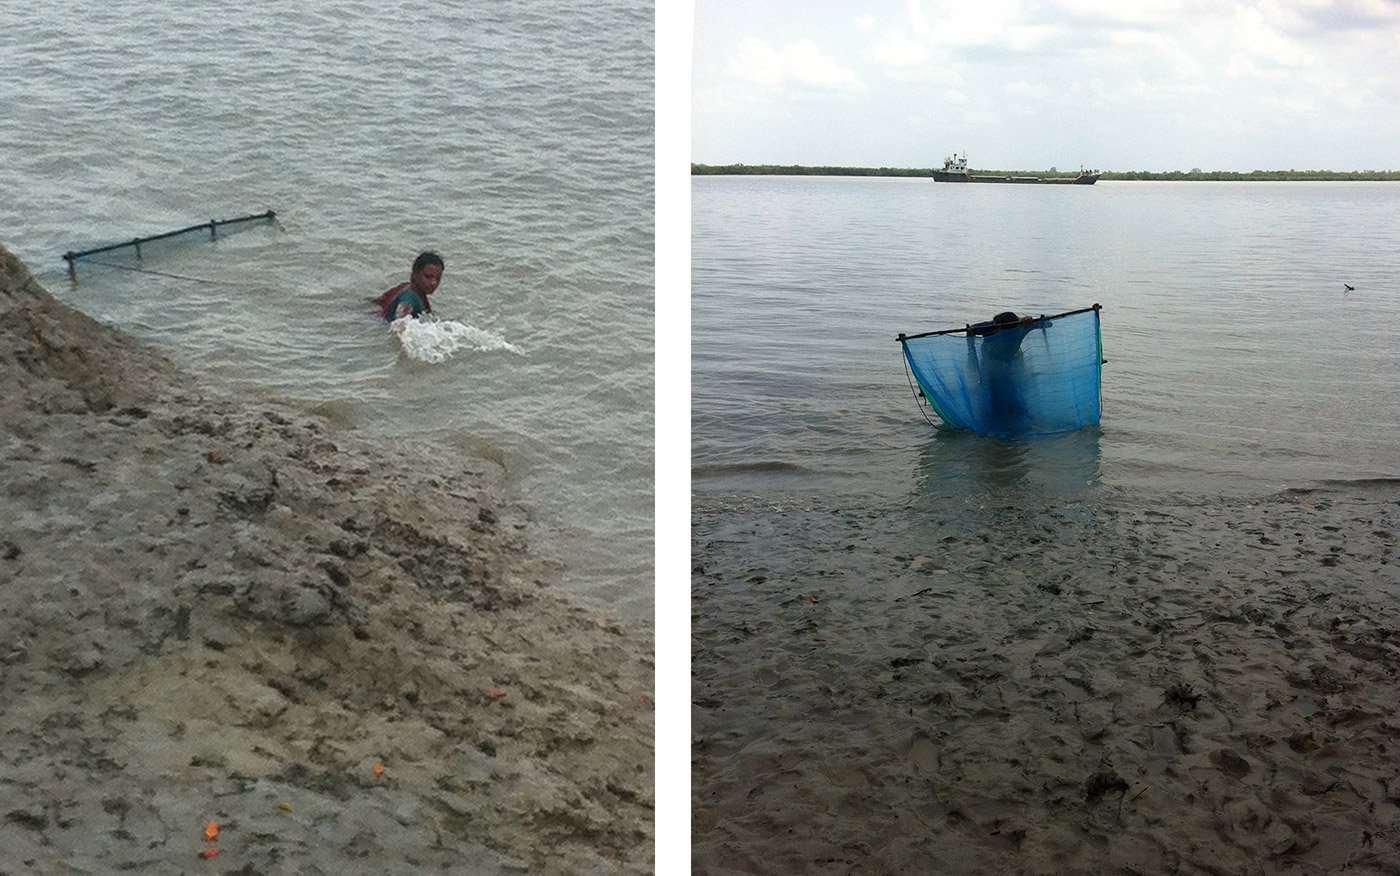 Left: The people who collect tiger prawn seedlings spend close to five hours in the water to get a sufficient catch. Right: A woman drags her net into the river at low tide, which is the best time to gather the seedlings